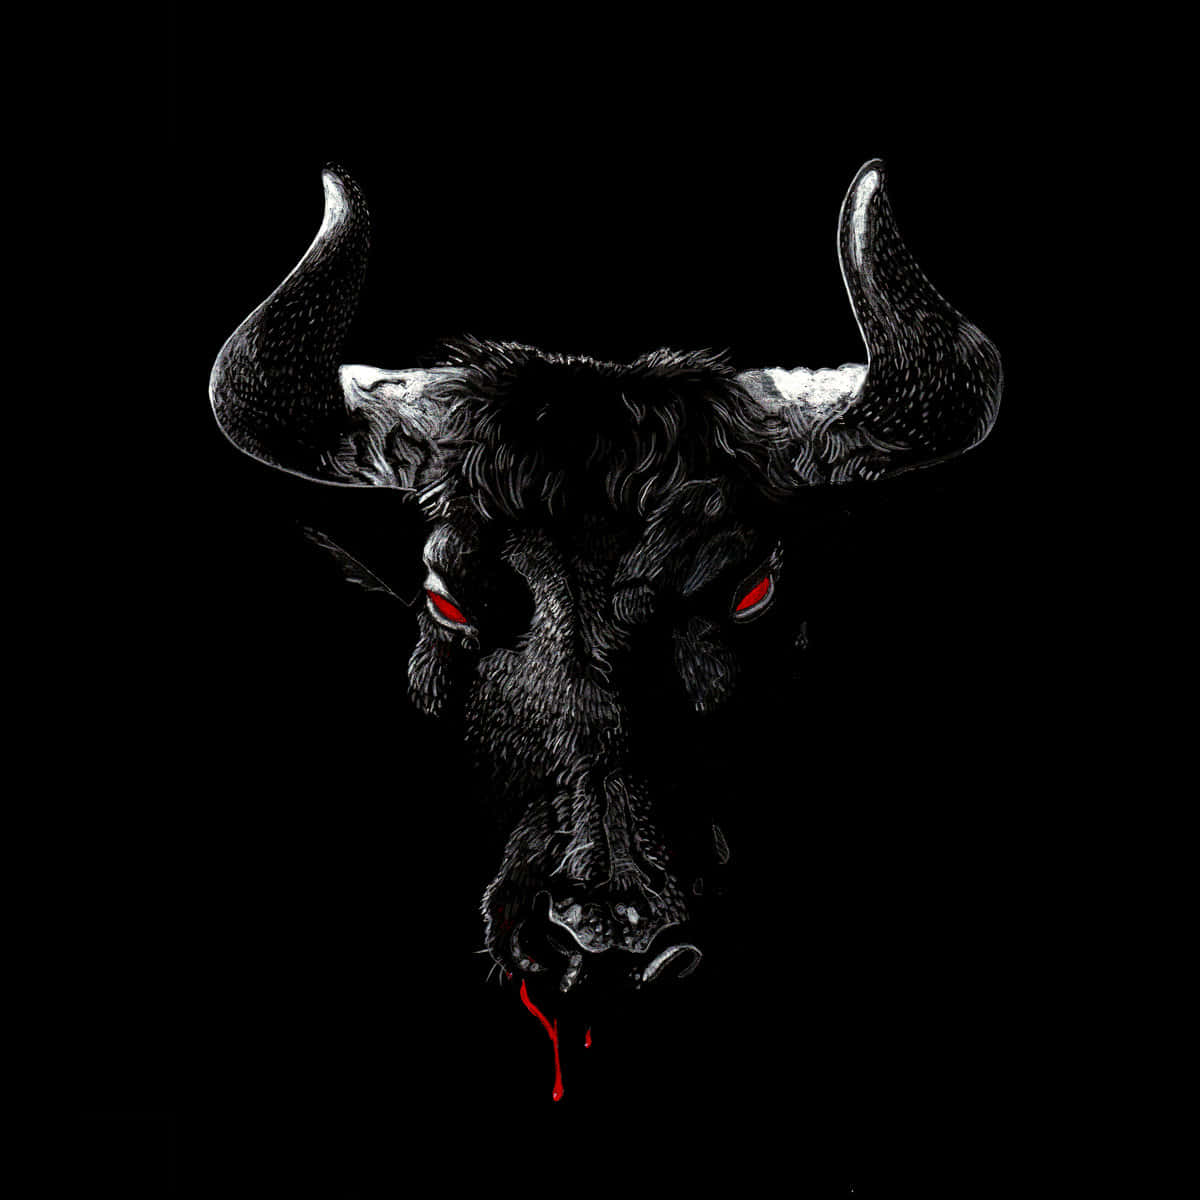 Bull Skull Pictures  Download Free Images on Unsplash